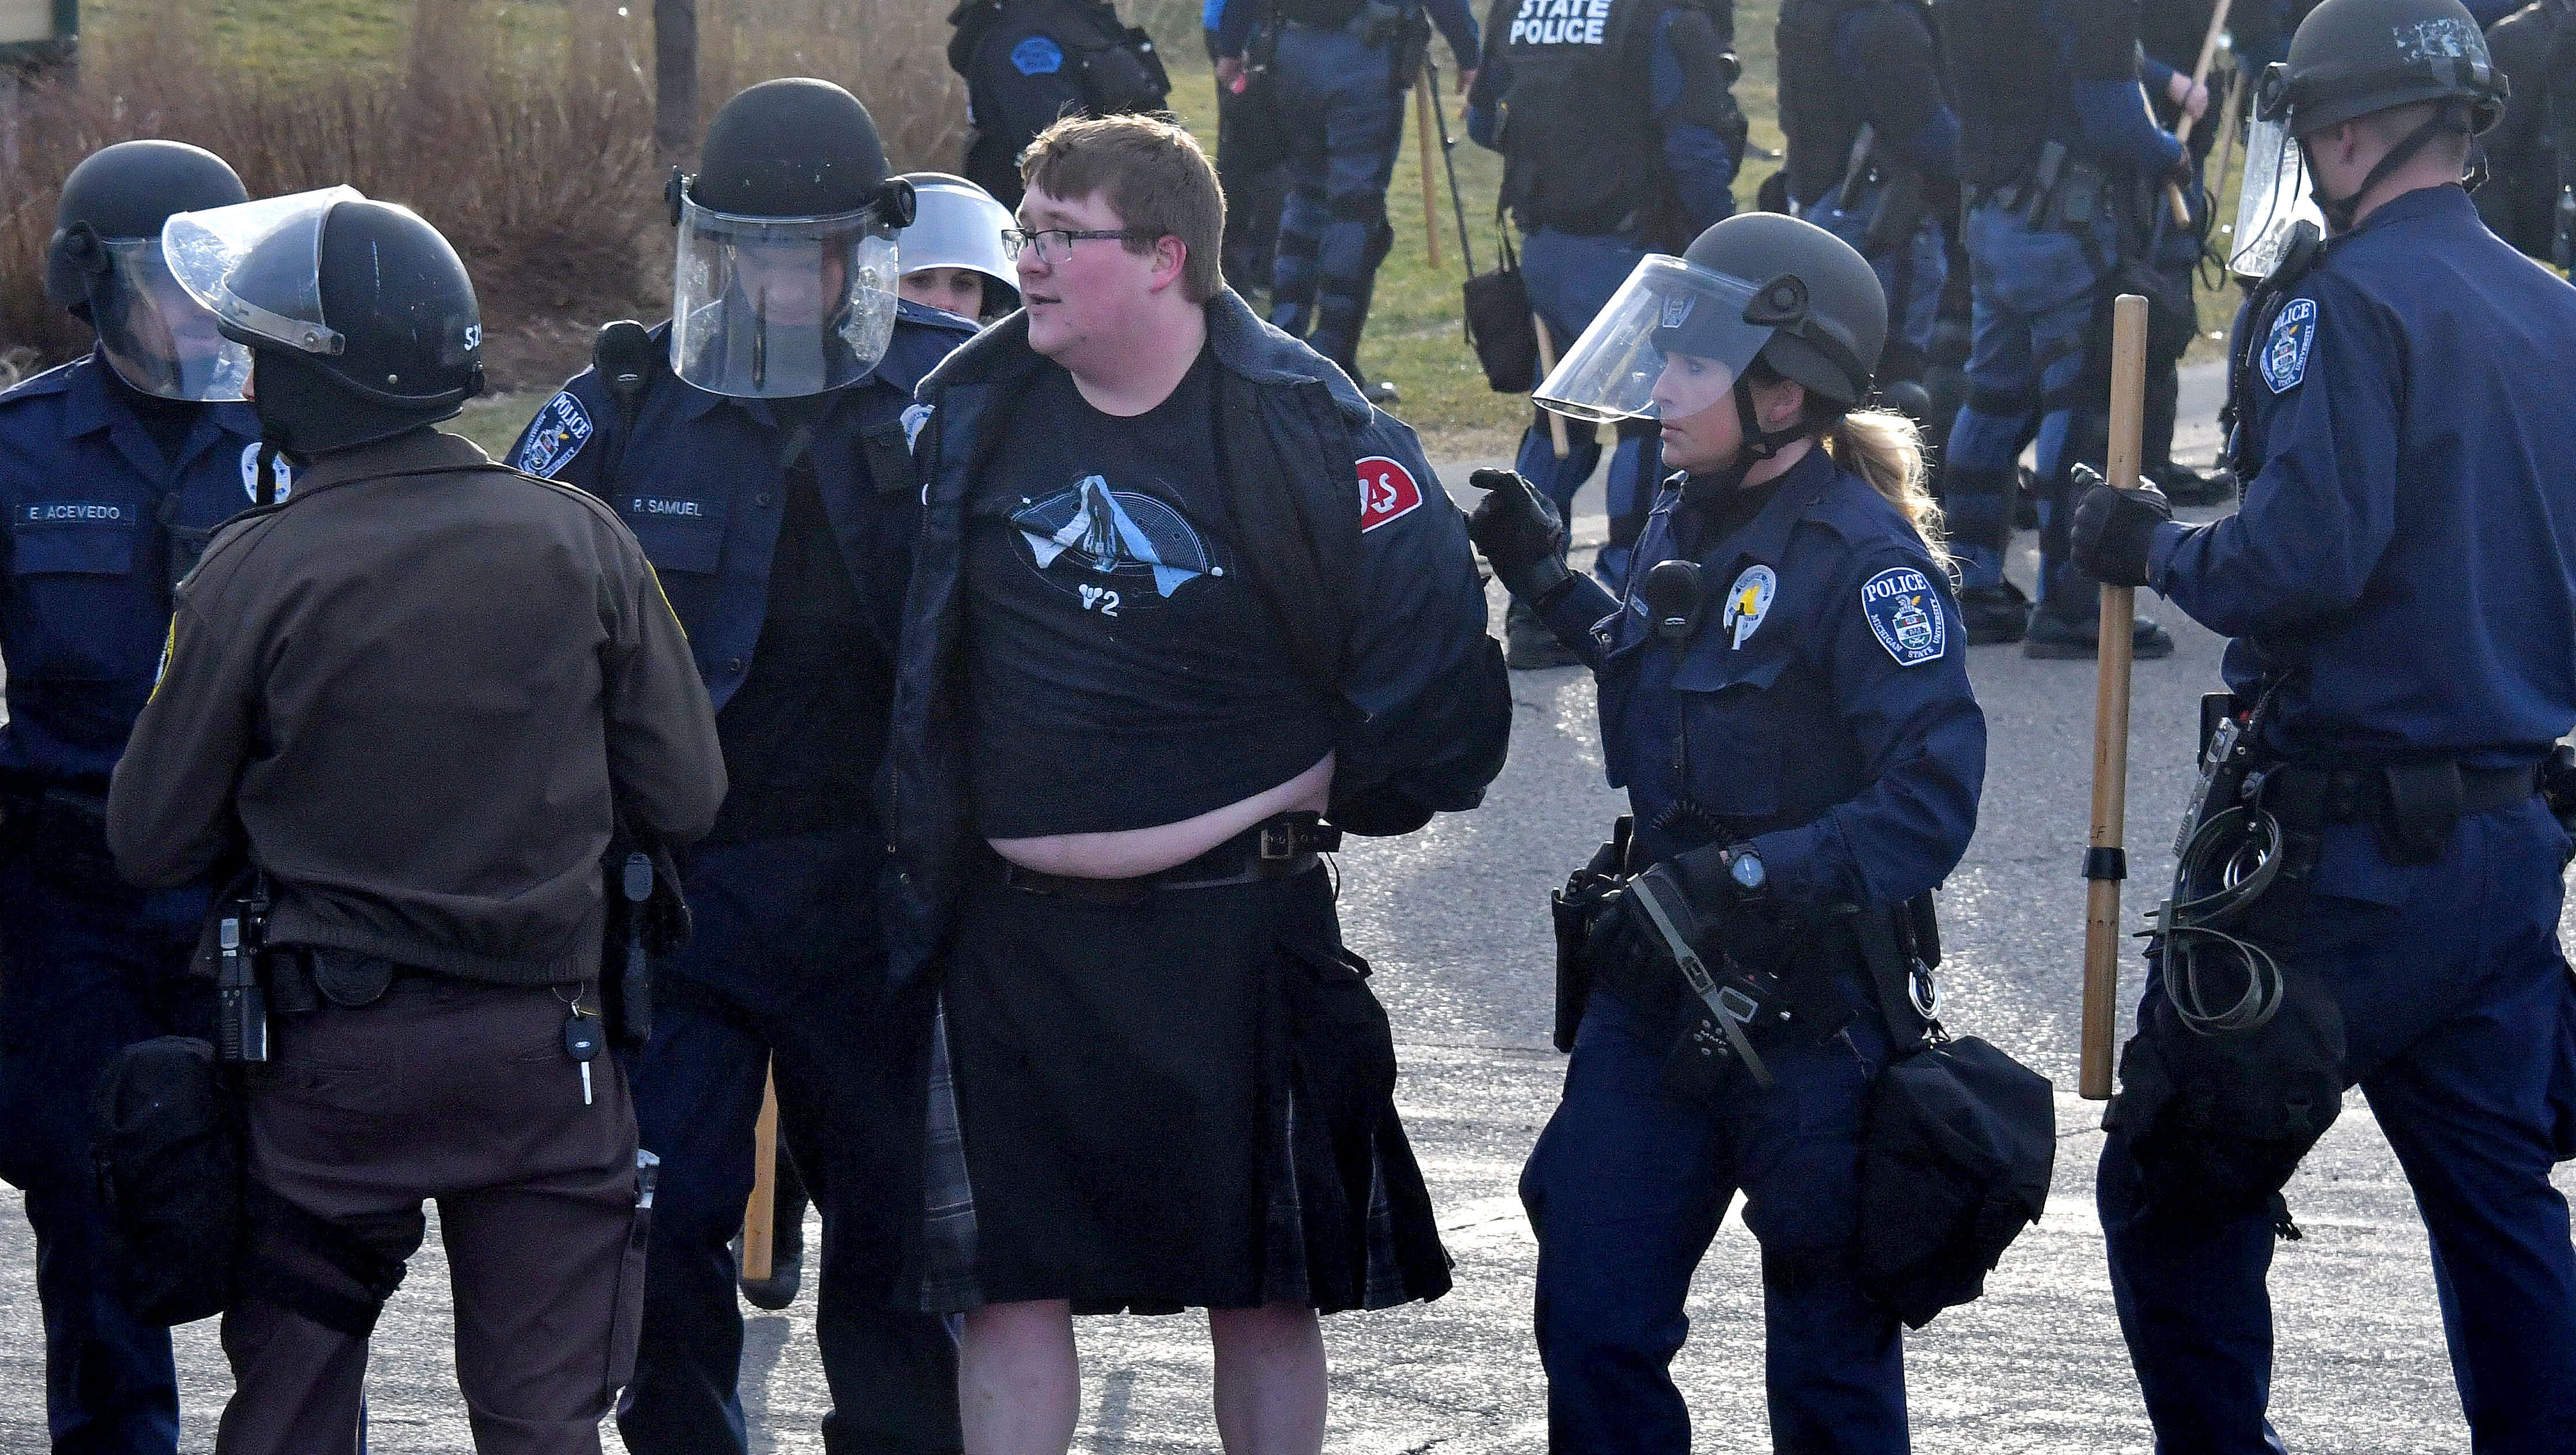 An anti-Spencer protester in a kilt is arrested and loaded into a police van.